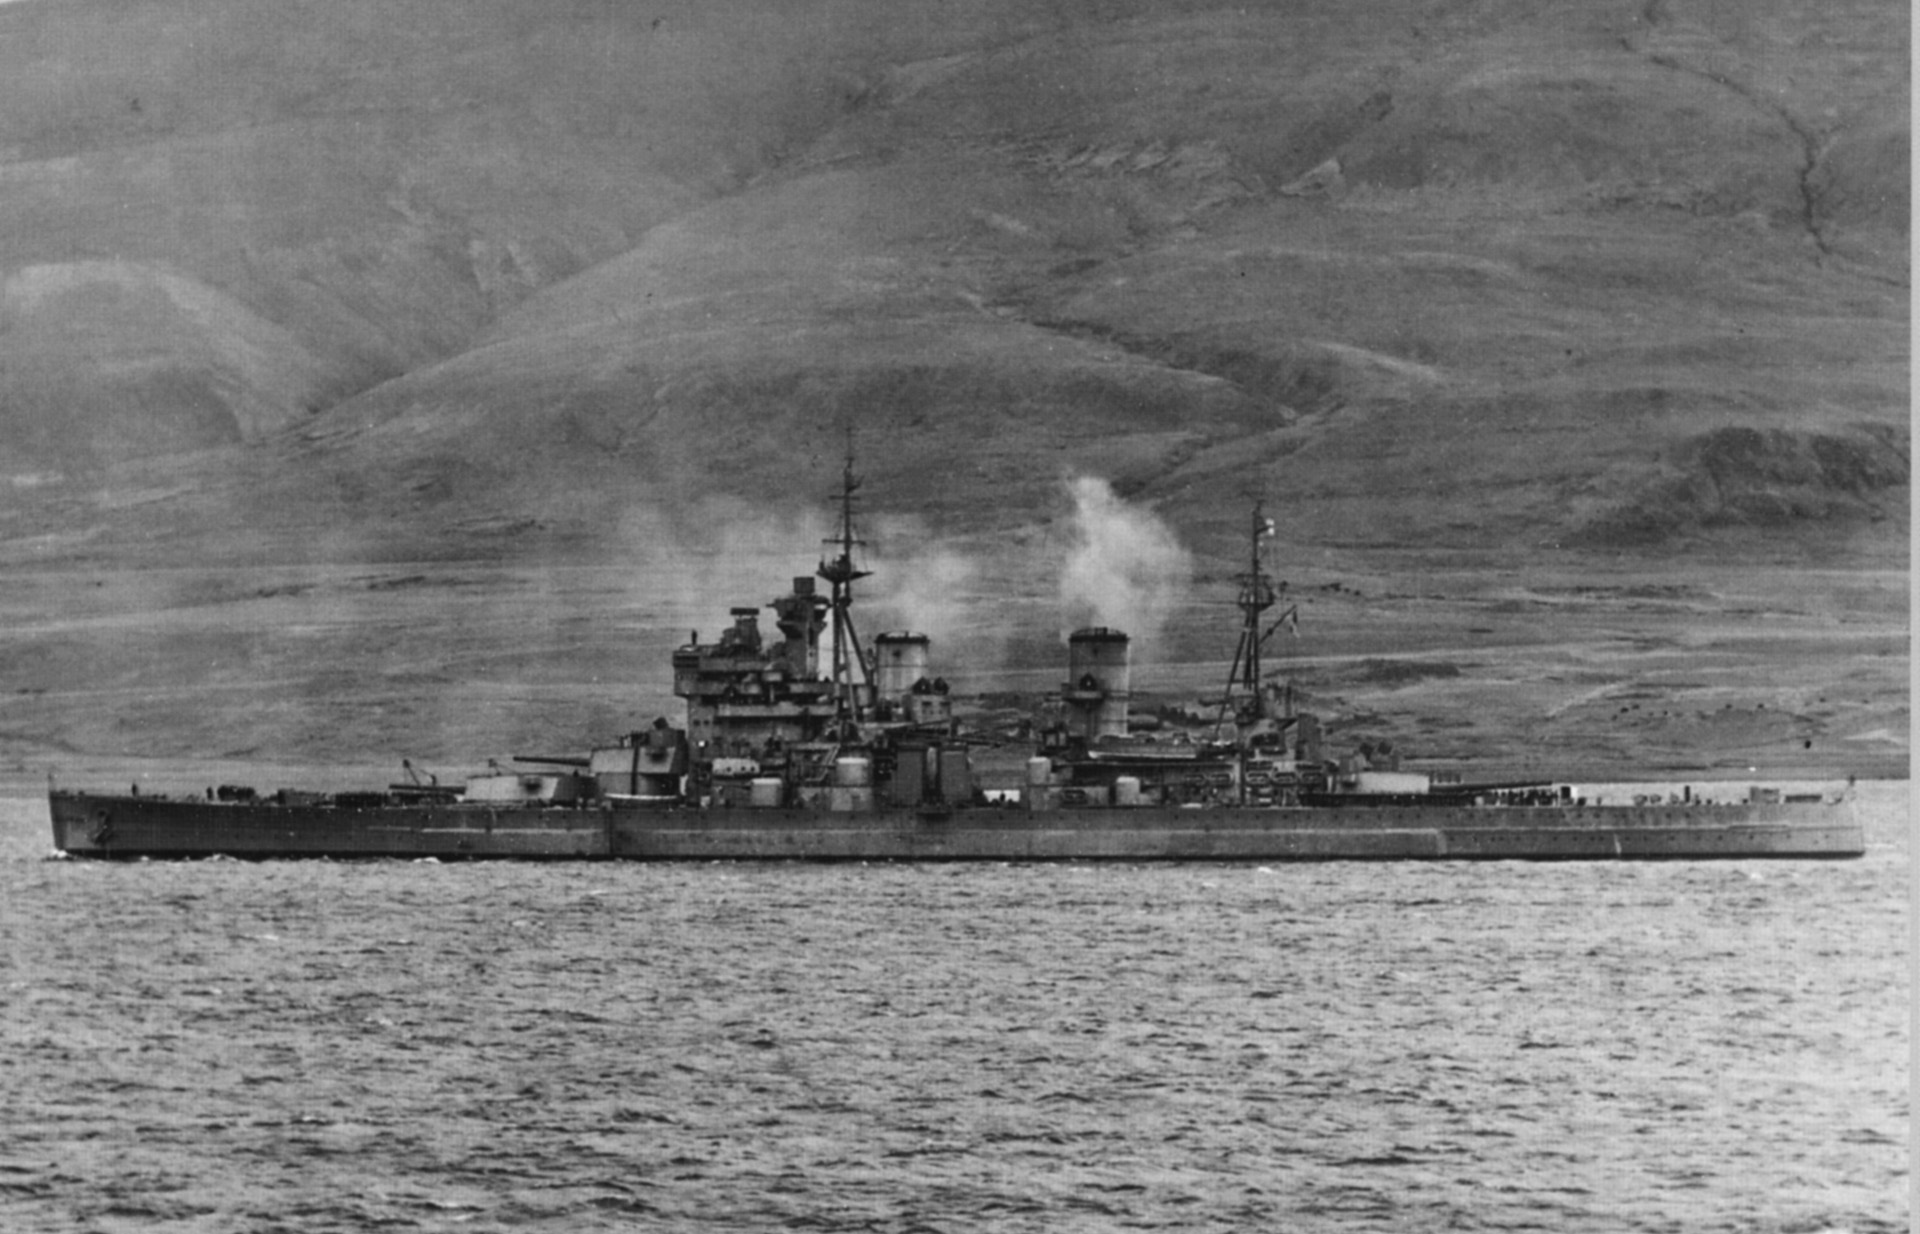 Photo taken from Prinz Eugen shows Bismarck firing on HMS Prince of Wales. The British ship was hit and badly damaged but did not sink.